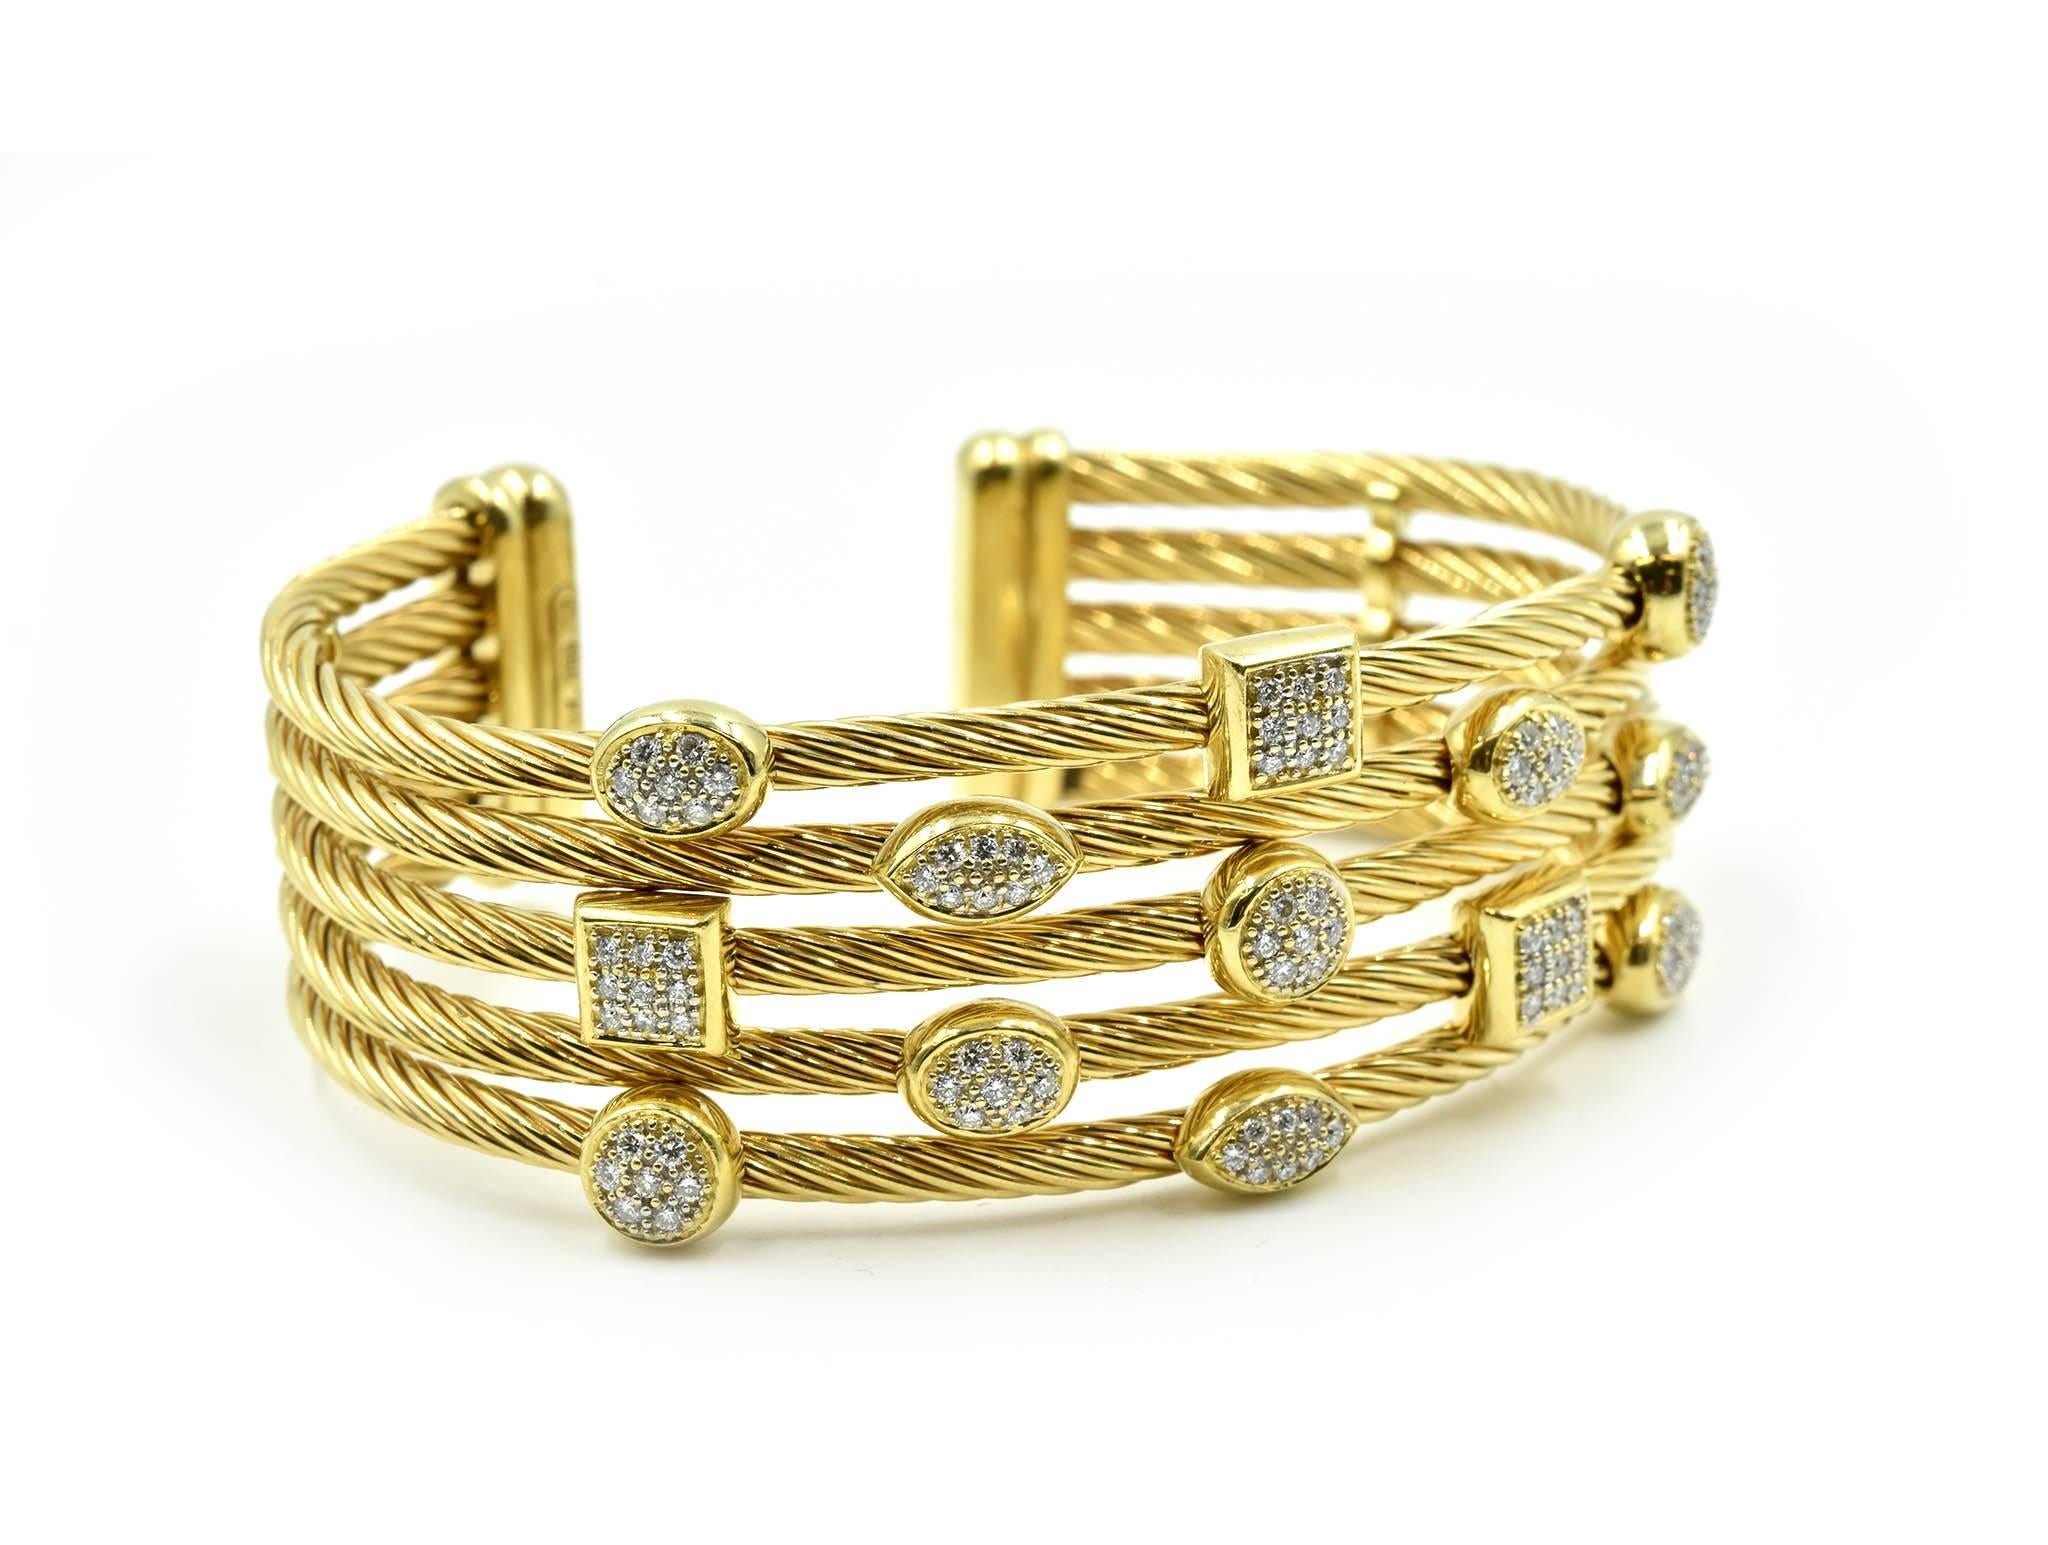 Designer: David Yurman
Collection: Confetti
Material: 18k yellow gold
Diamonds: 100 round brilliant cuts = 0.55 carat total weight
Dimensions: cuff bracelet will fit a 6 1/2-inch wrist, the top of the cuff is 1-inch long
Weight: 58.28 grams
Retail: